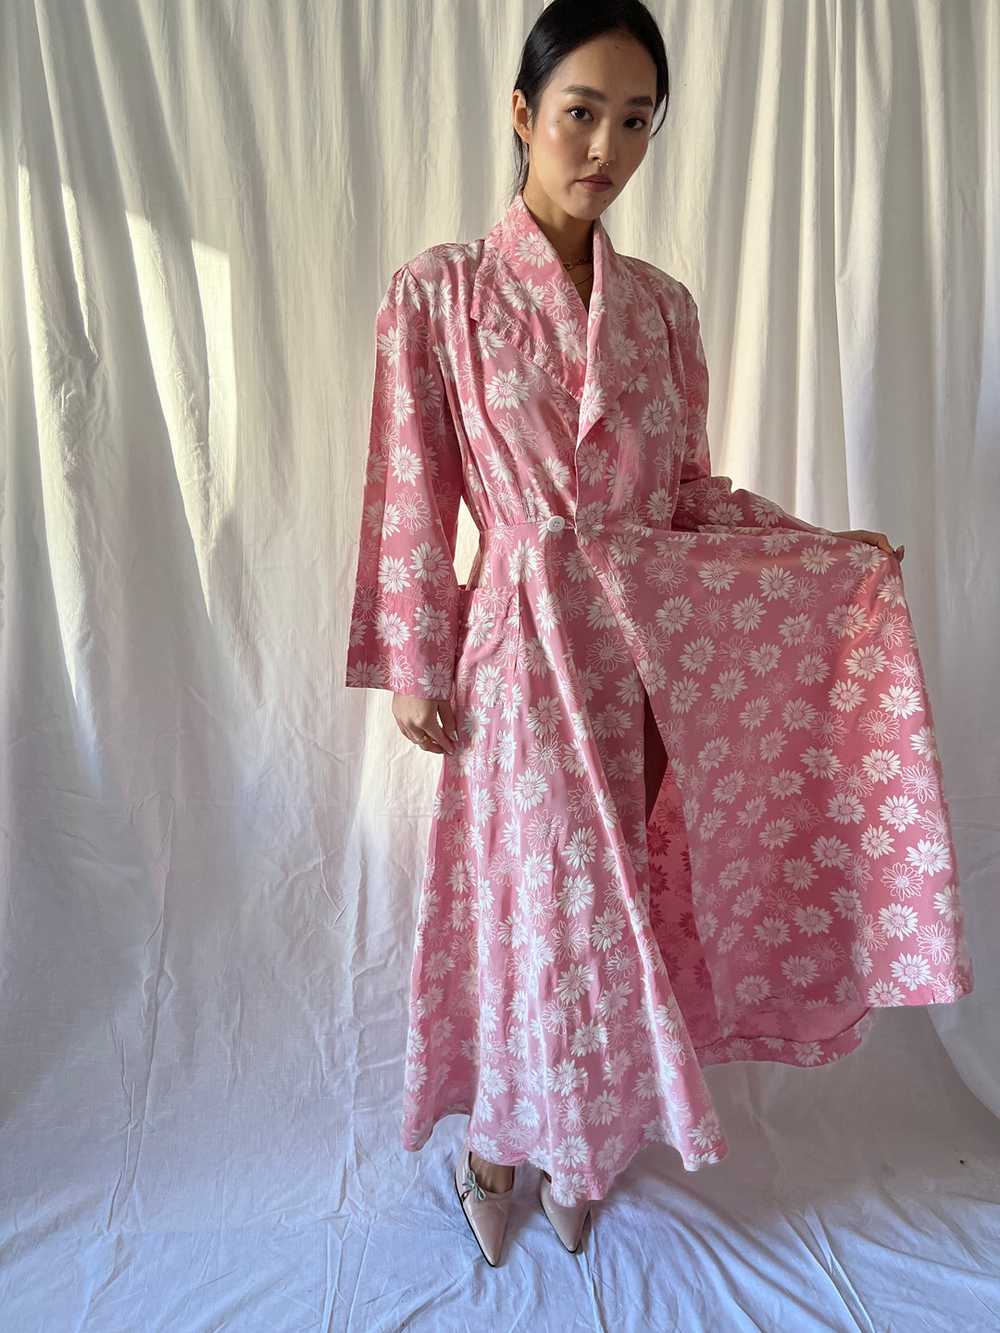 Vintage 1930s pink daisies gown robe - image 7